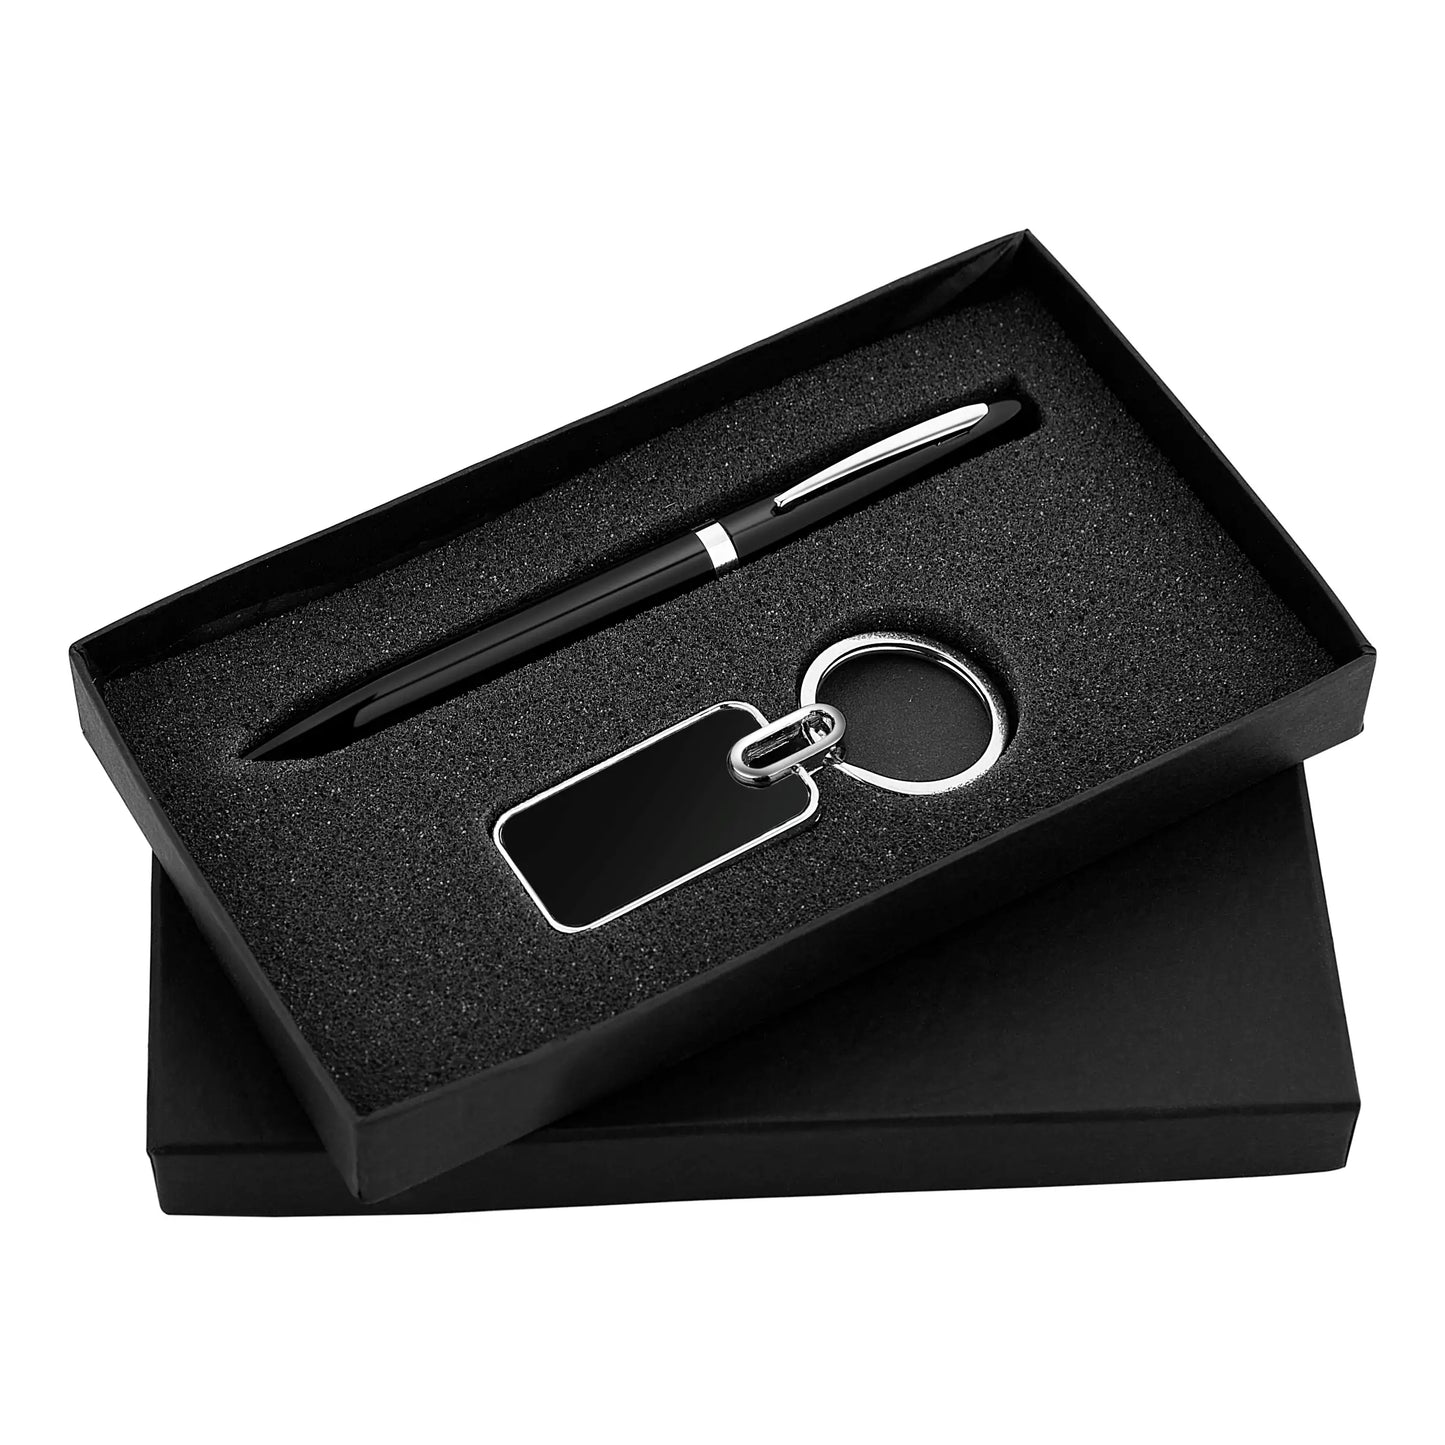 Pen and Keychain 2in1 Combo Gift Set - For Employee Joining Kit, Corporate, Client or Dealer Gifting, Promotional Freebie JK3